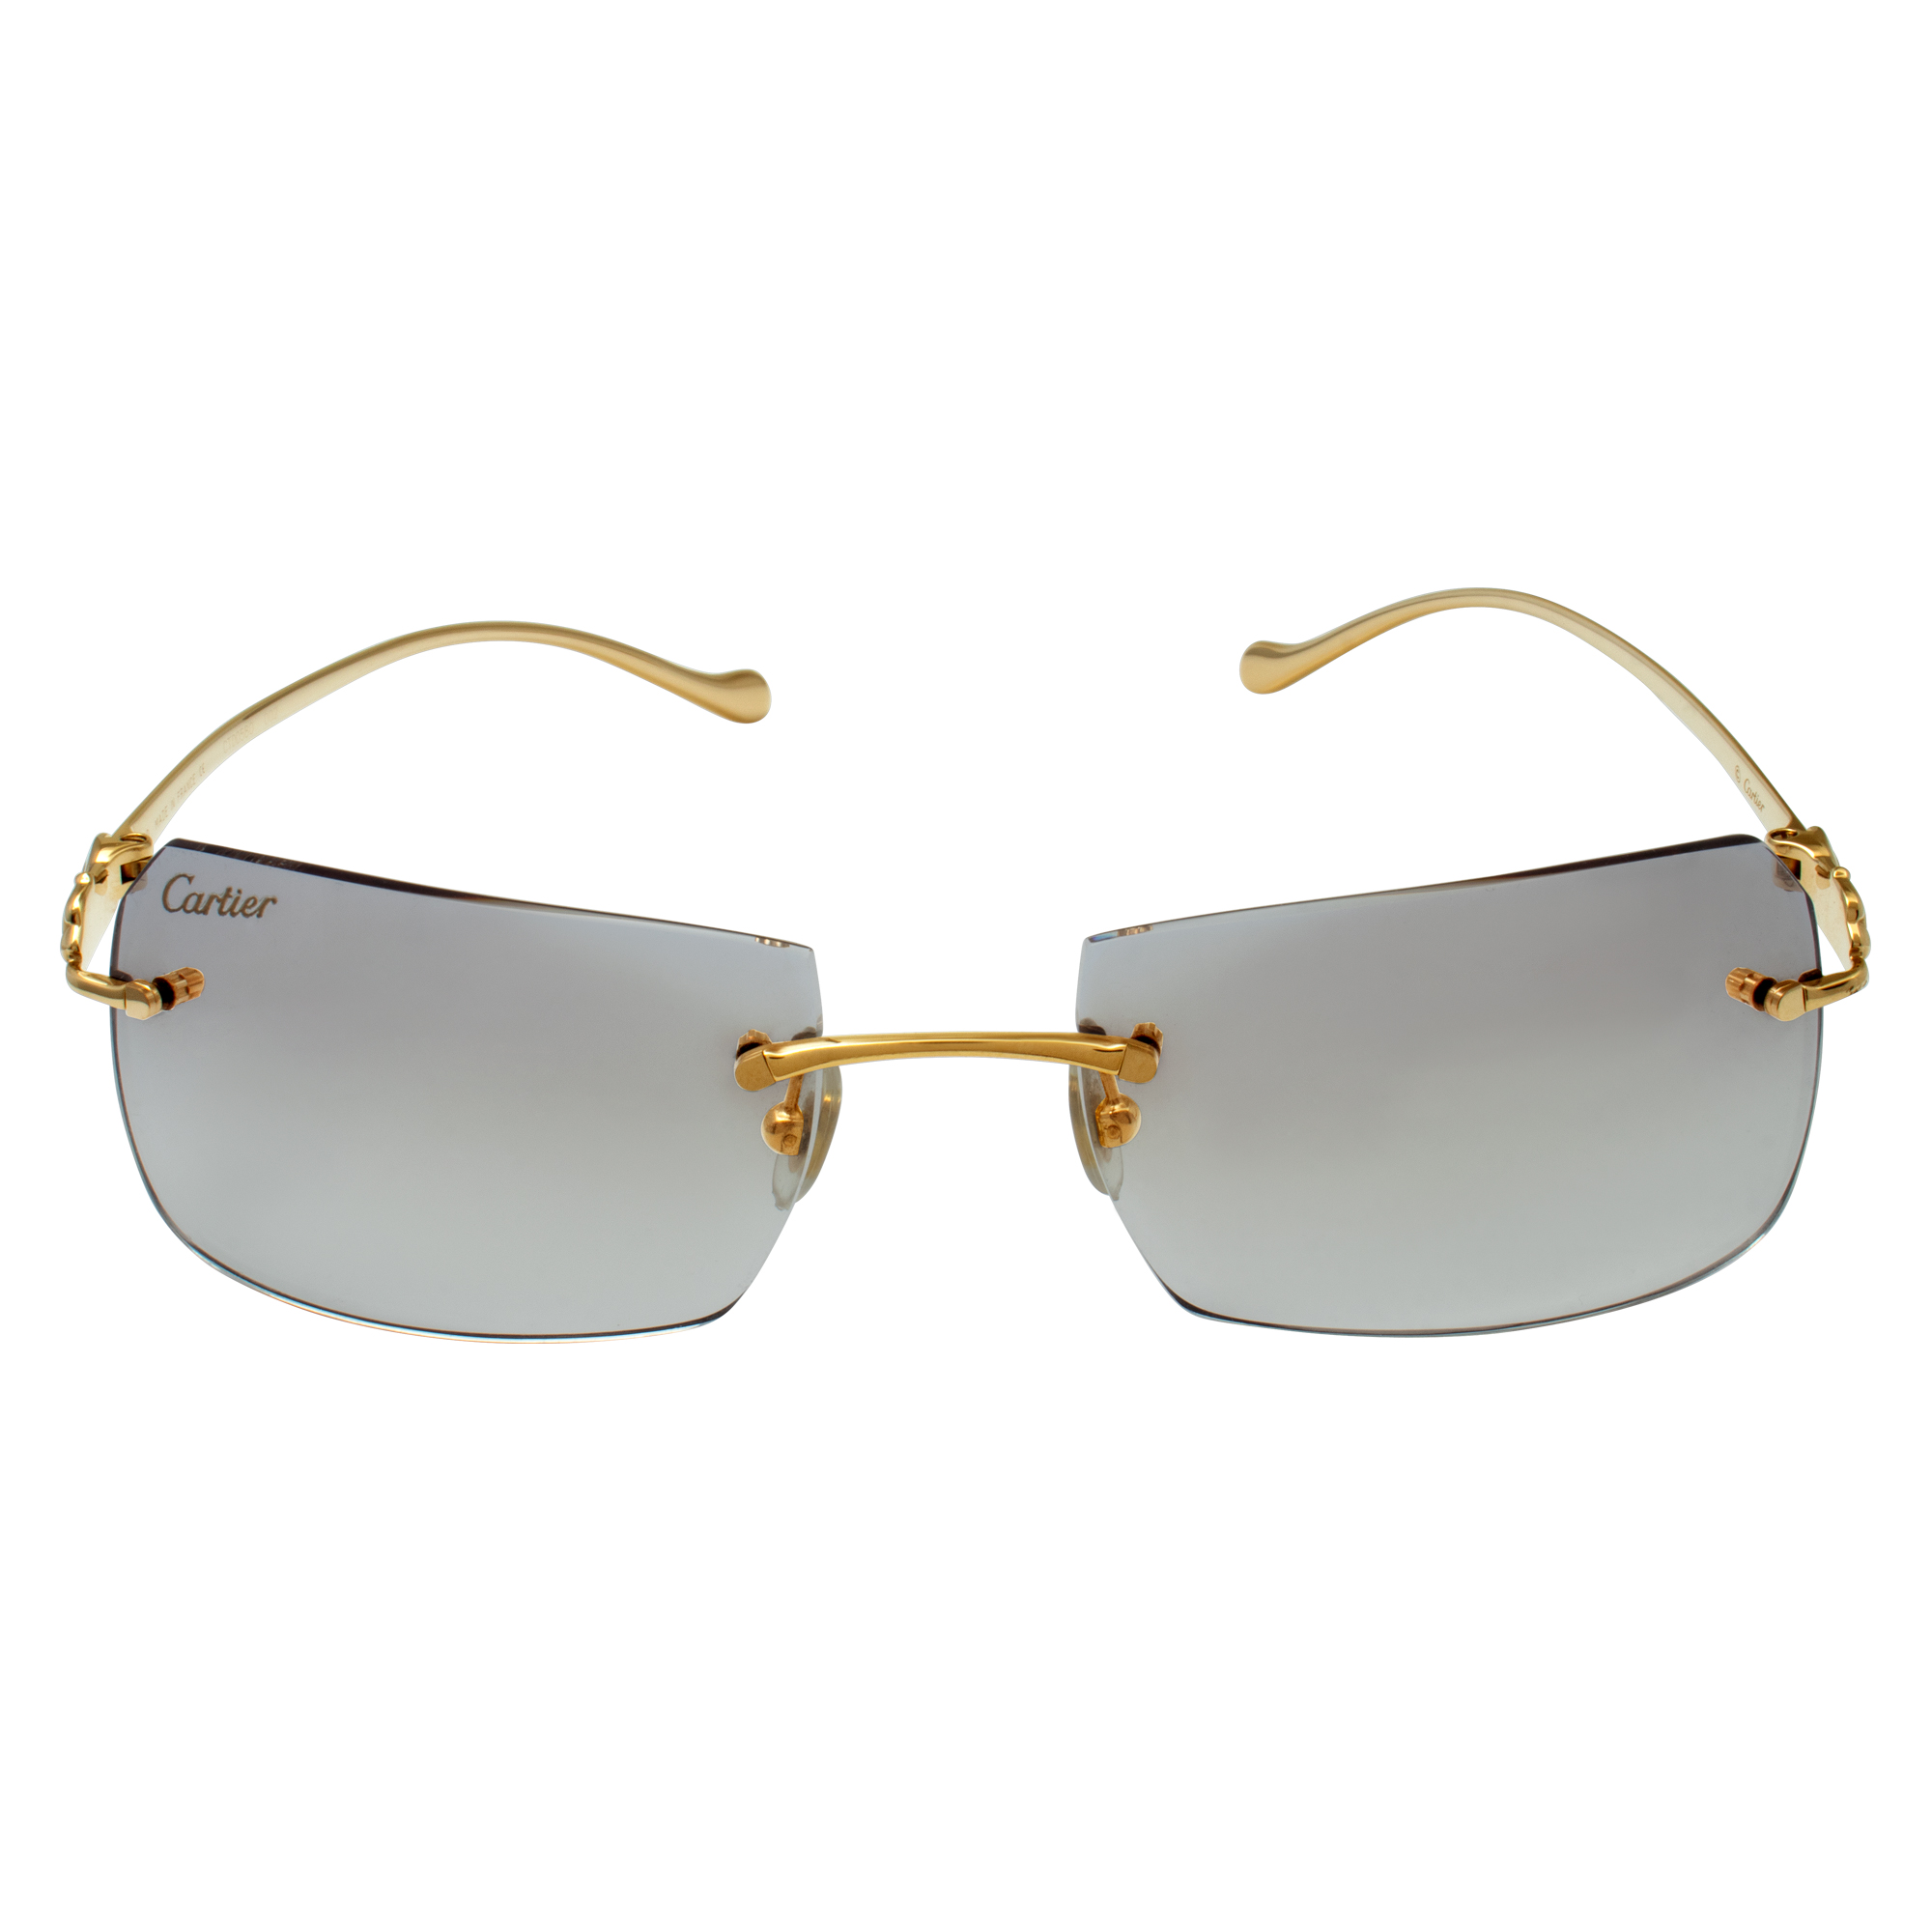 Cartier Panthere Sunglasses image 1